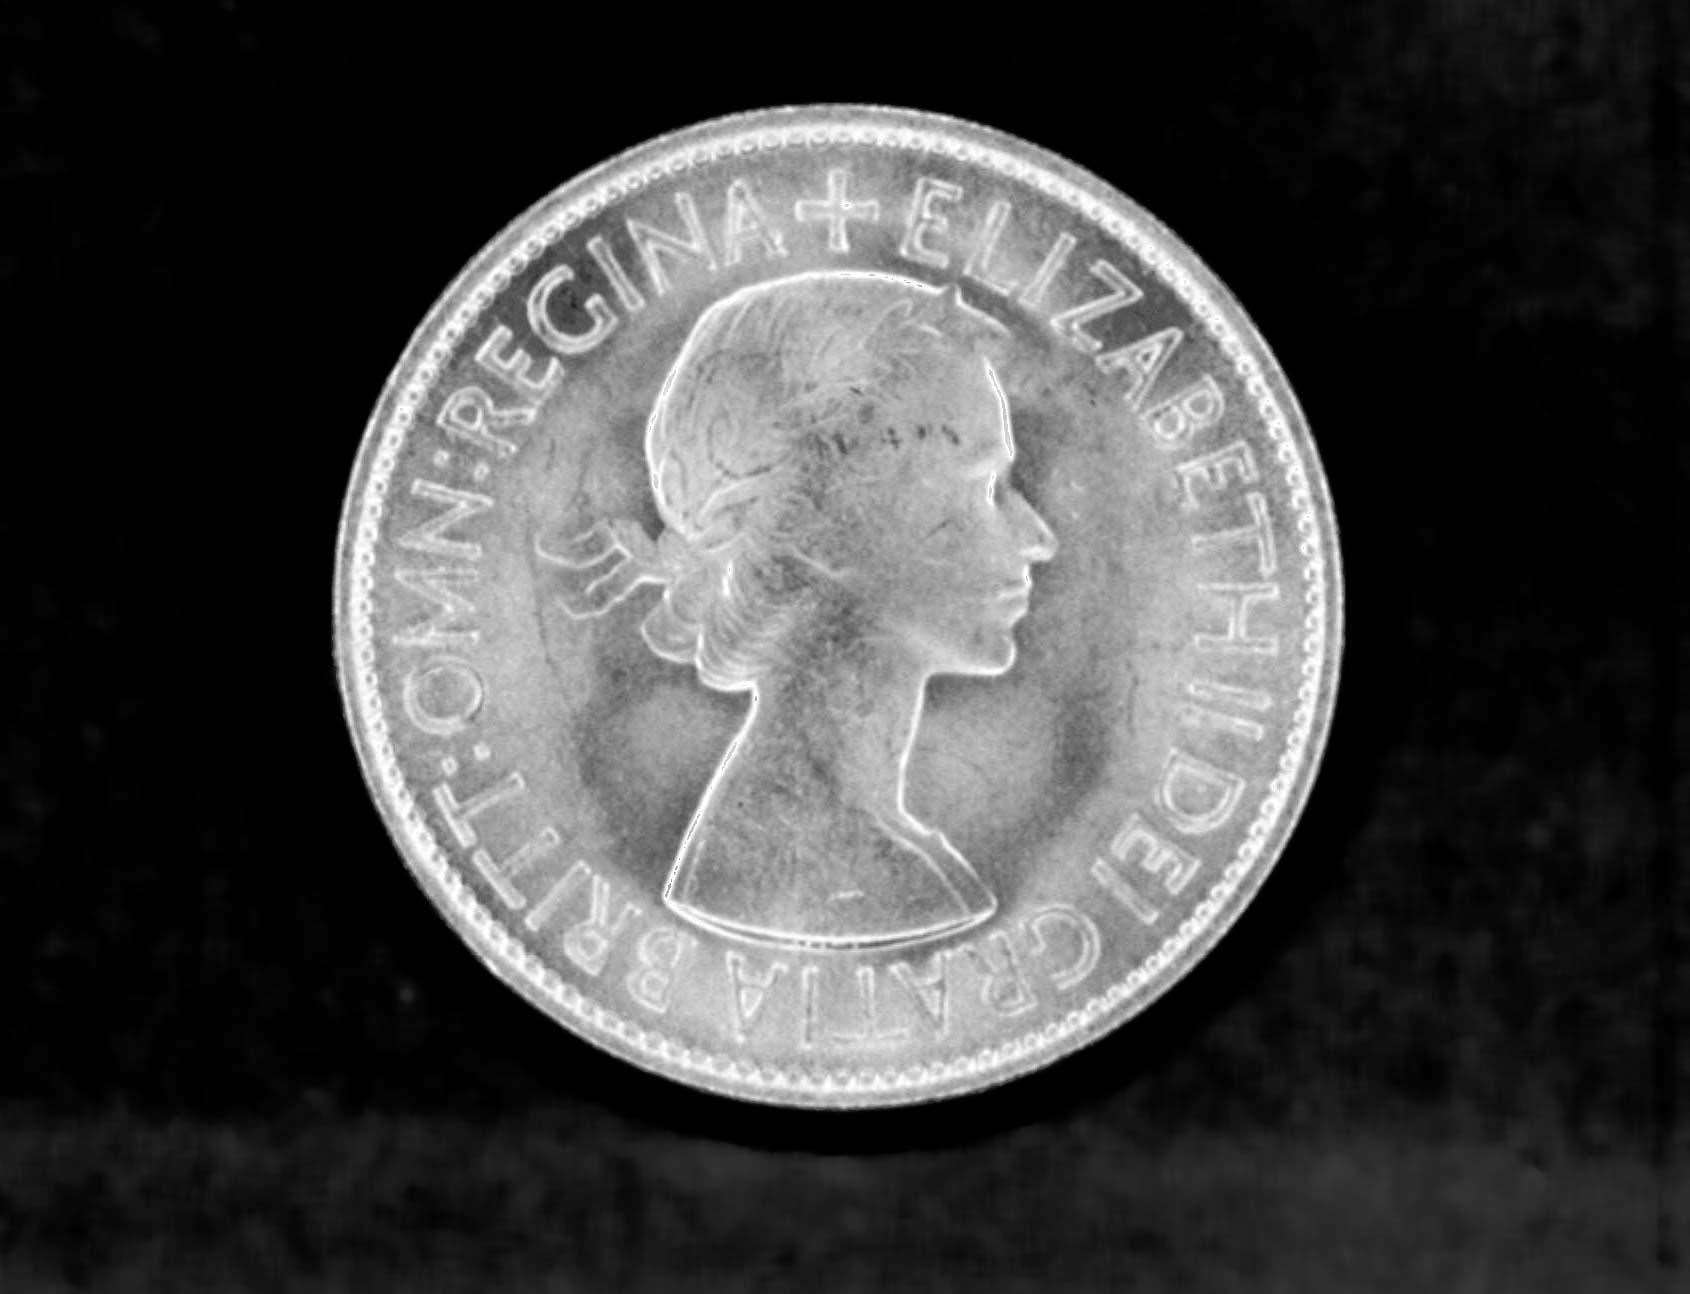 The obverse of the half-crown piece minted in 1953, after Queen Elizabeth II’s accession the previous year, portraying as a young woman in her mid-20s (PA)